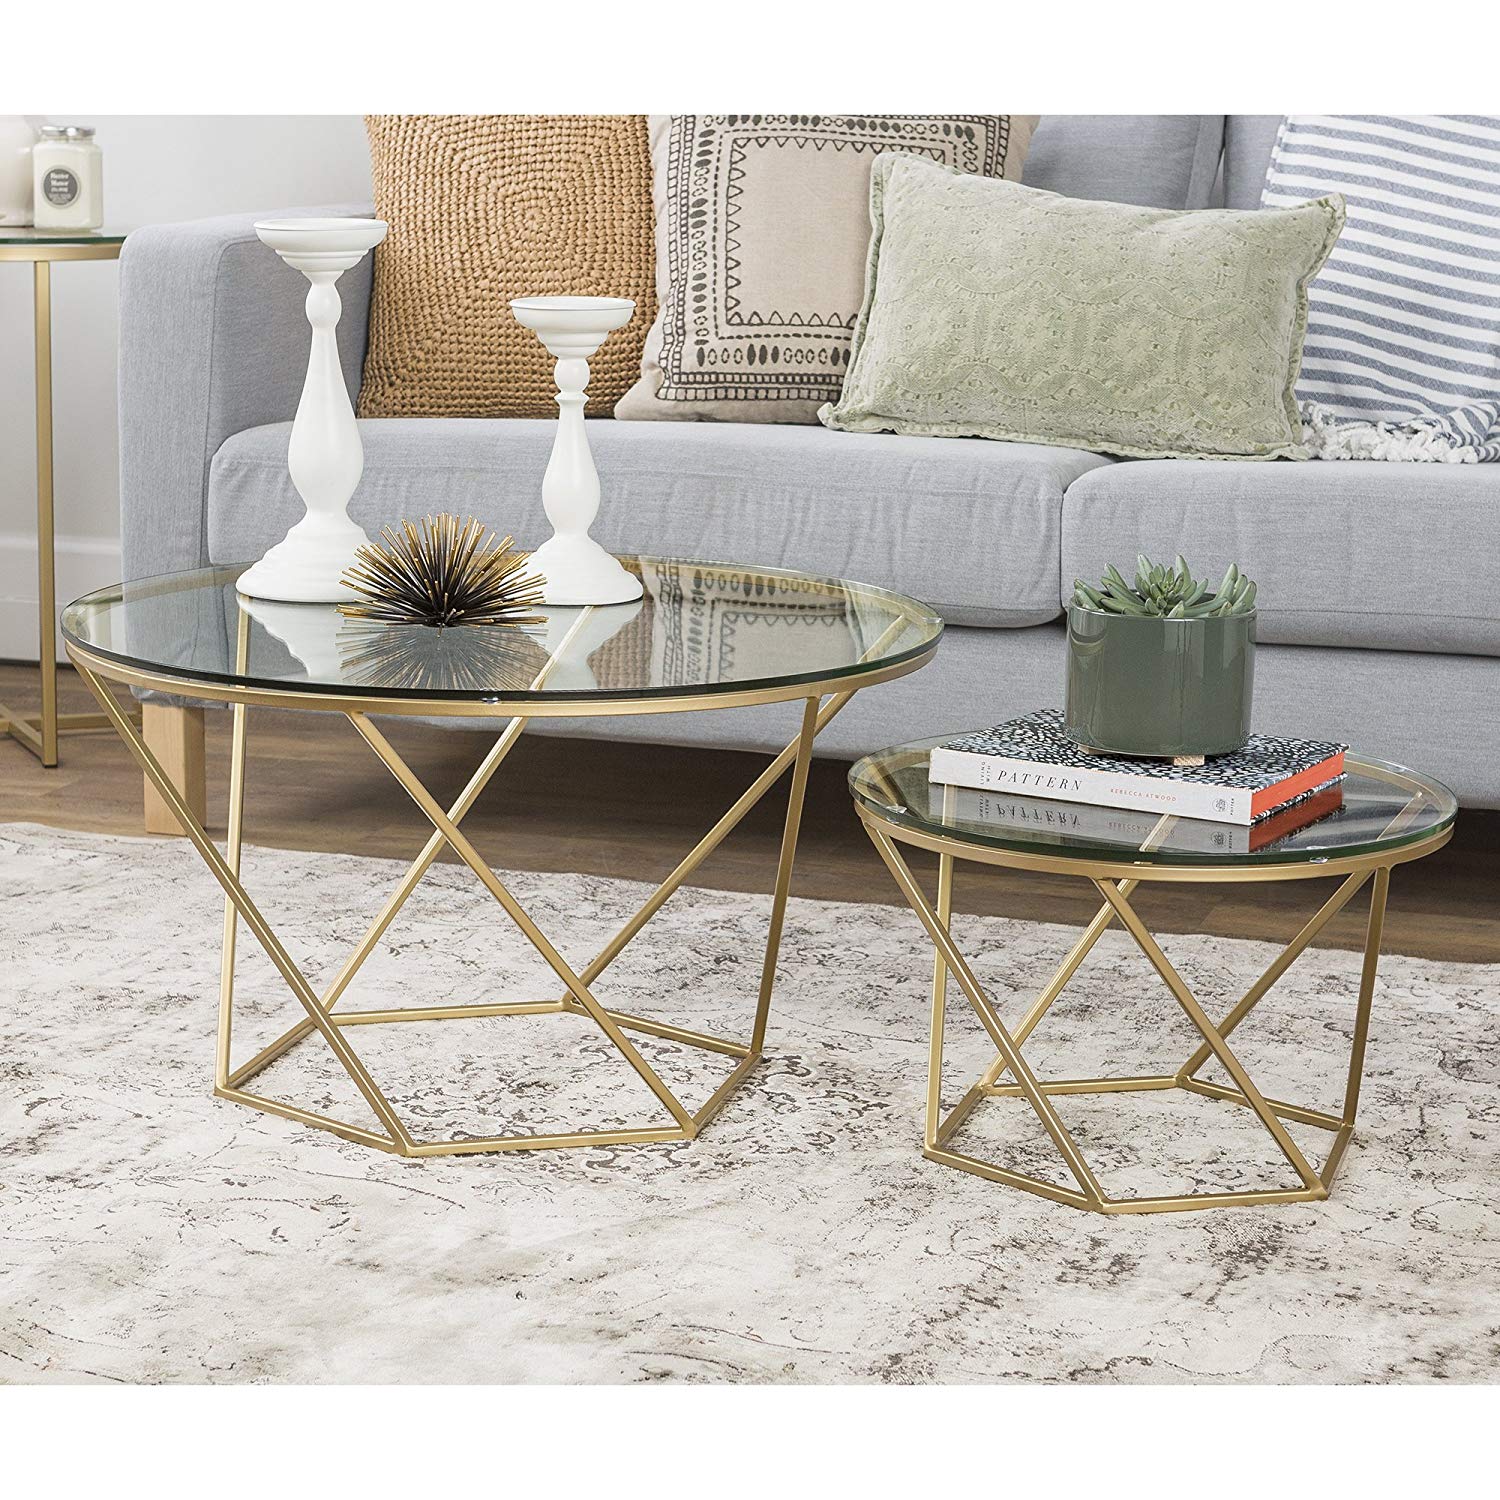 furniture geometric glass nesting coffee tables bxel end gold kitchen dining ashley cribs big table universal children mirrored target green laura sofa gray living room ideas